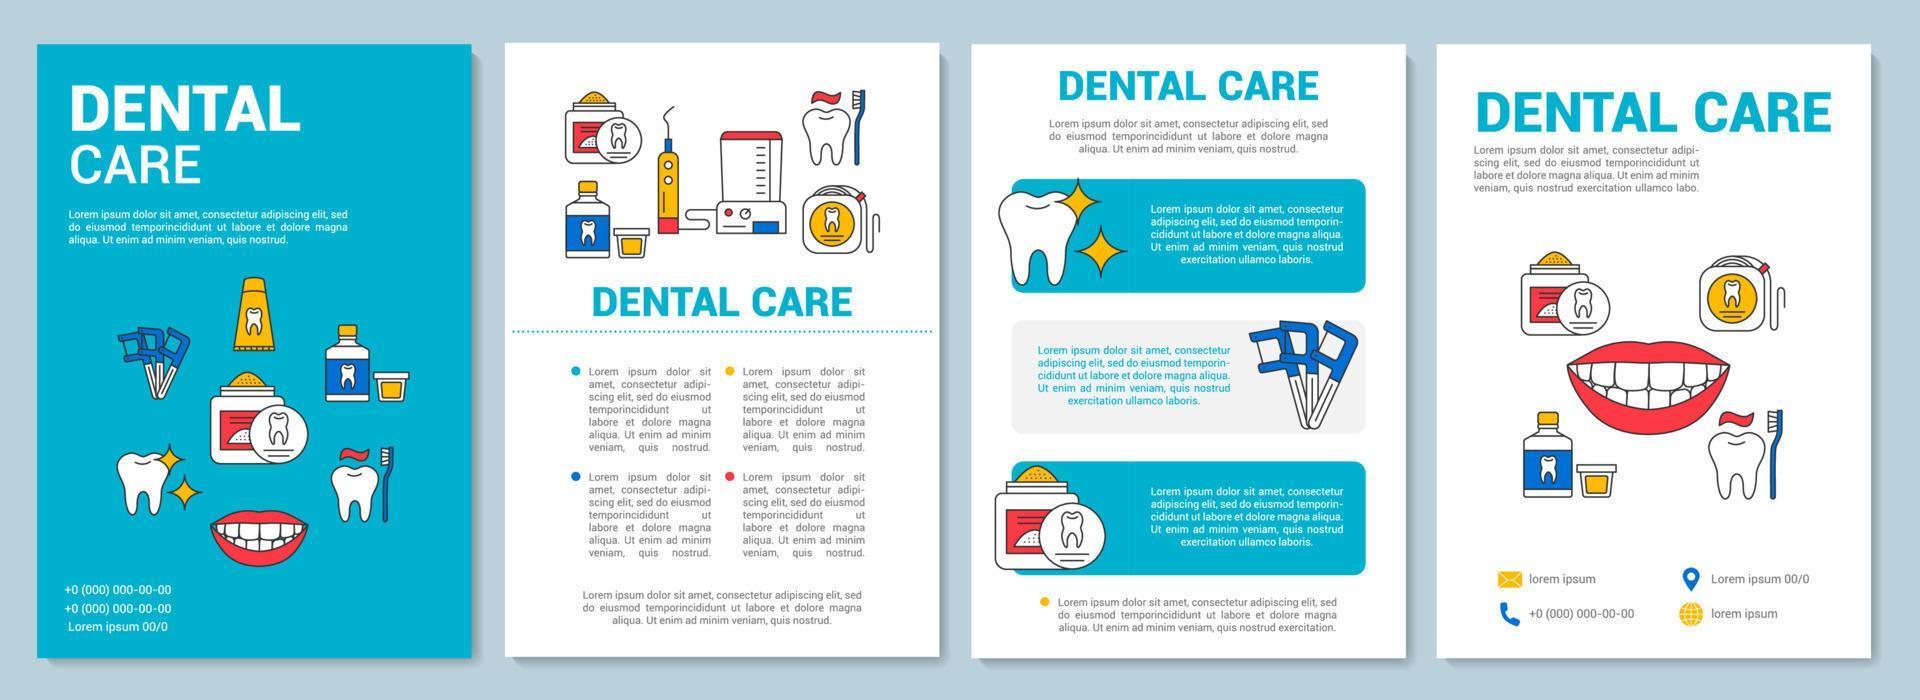 Dental care brochure template layout. Prevent tooth decay. Flyer, booklet, leaflet print design with linear illustrations. Vector page layouts for magazines, annual reports, advertising posters